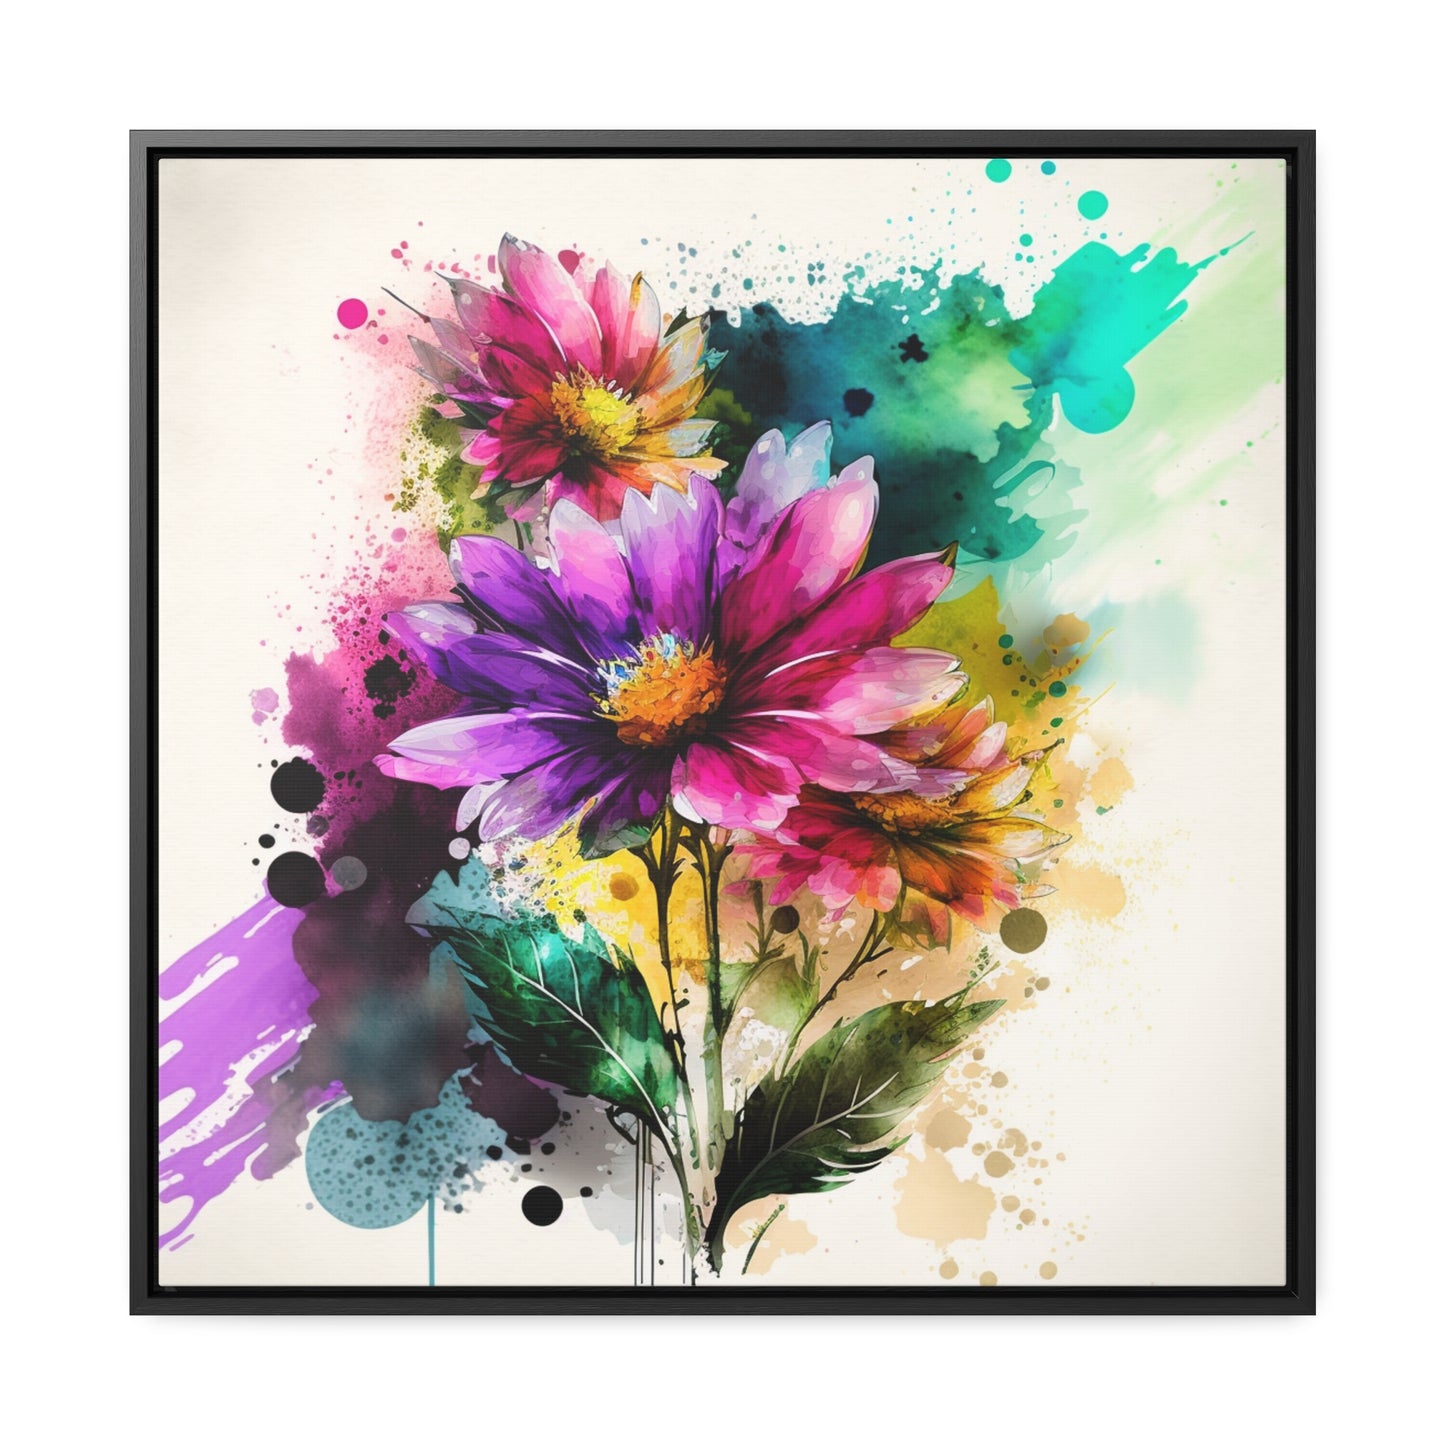 Gallery Canvas Wraps, Square Frame Bright Spring Flowers 1